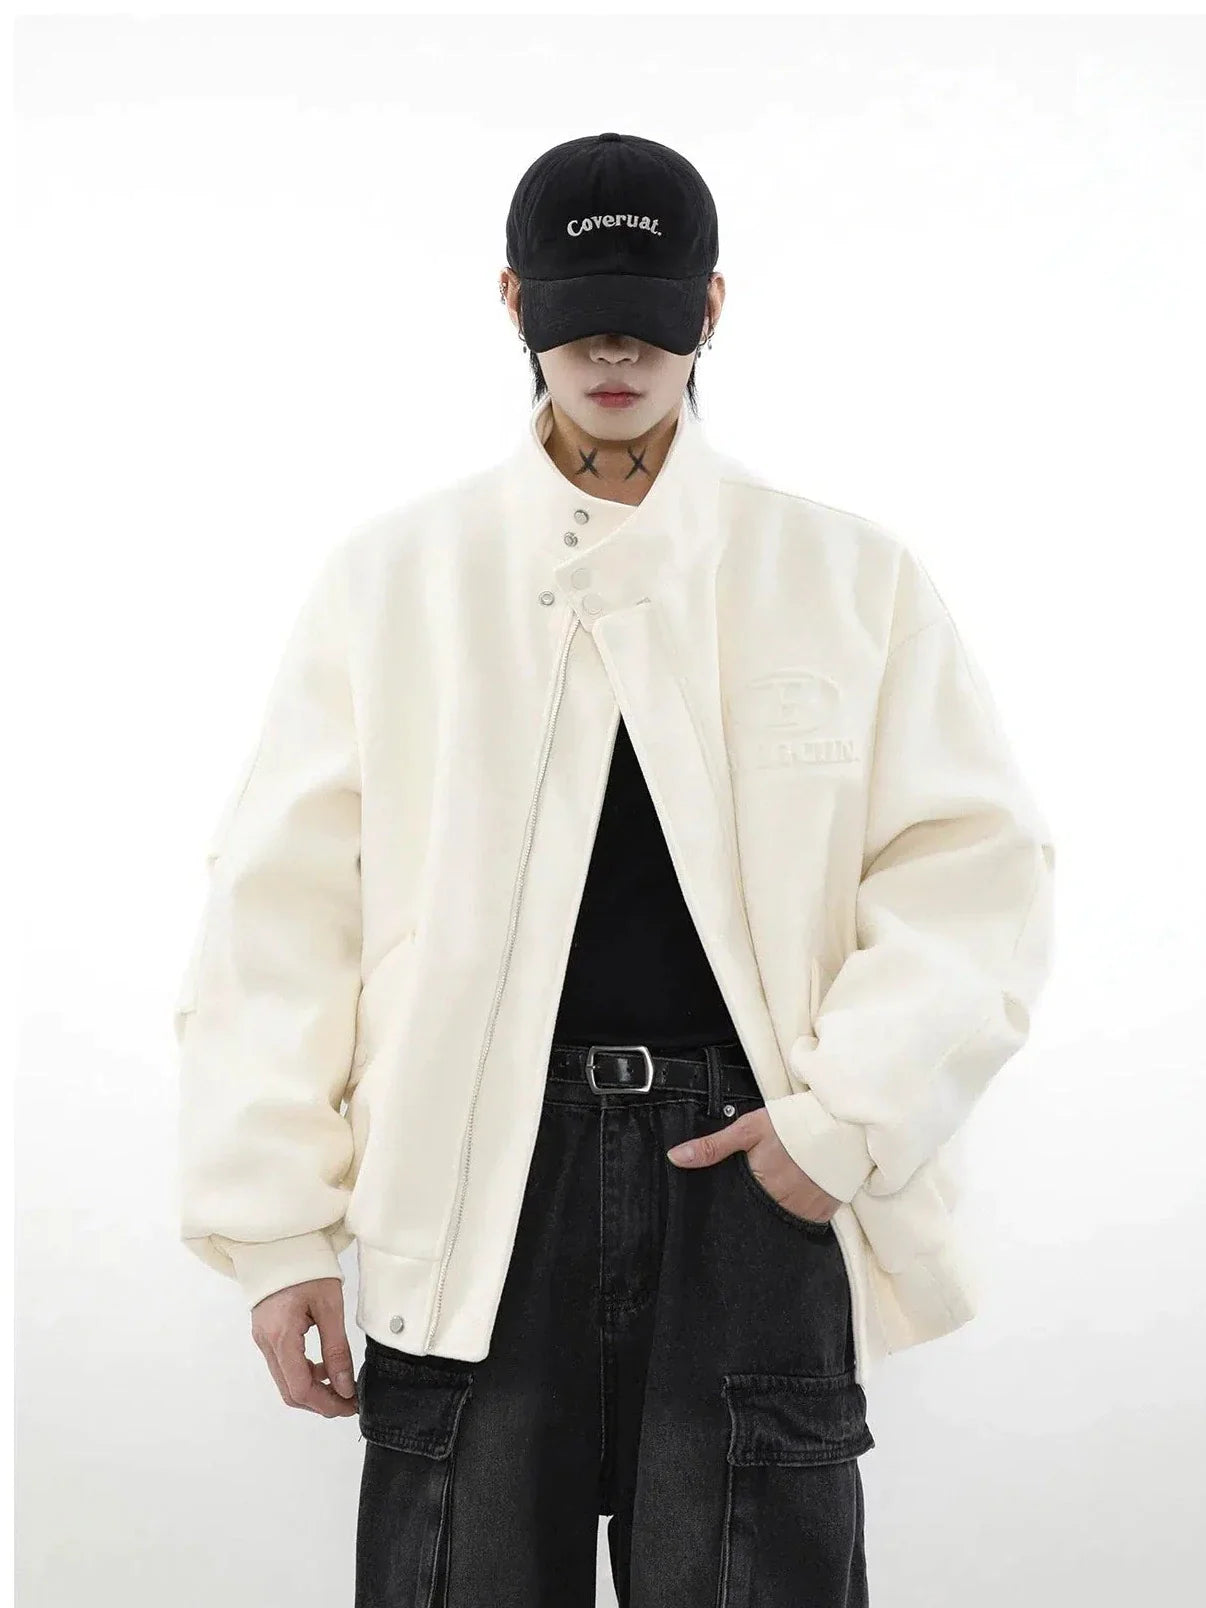 Woolen Clean Solid Color Jacket Korean Street Fashion Jacket By Mr Nearly Shop Online at OH Vault